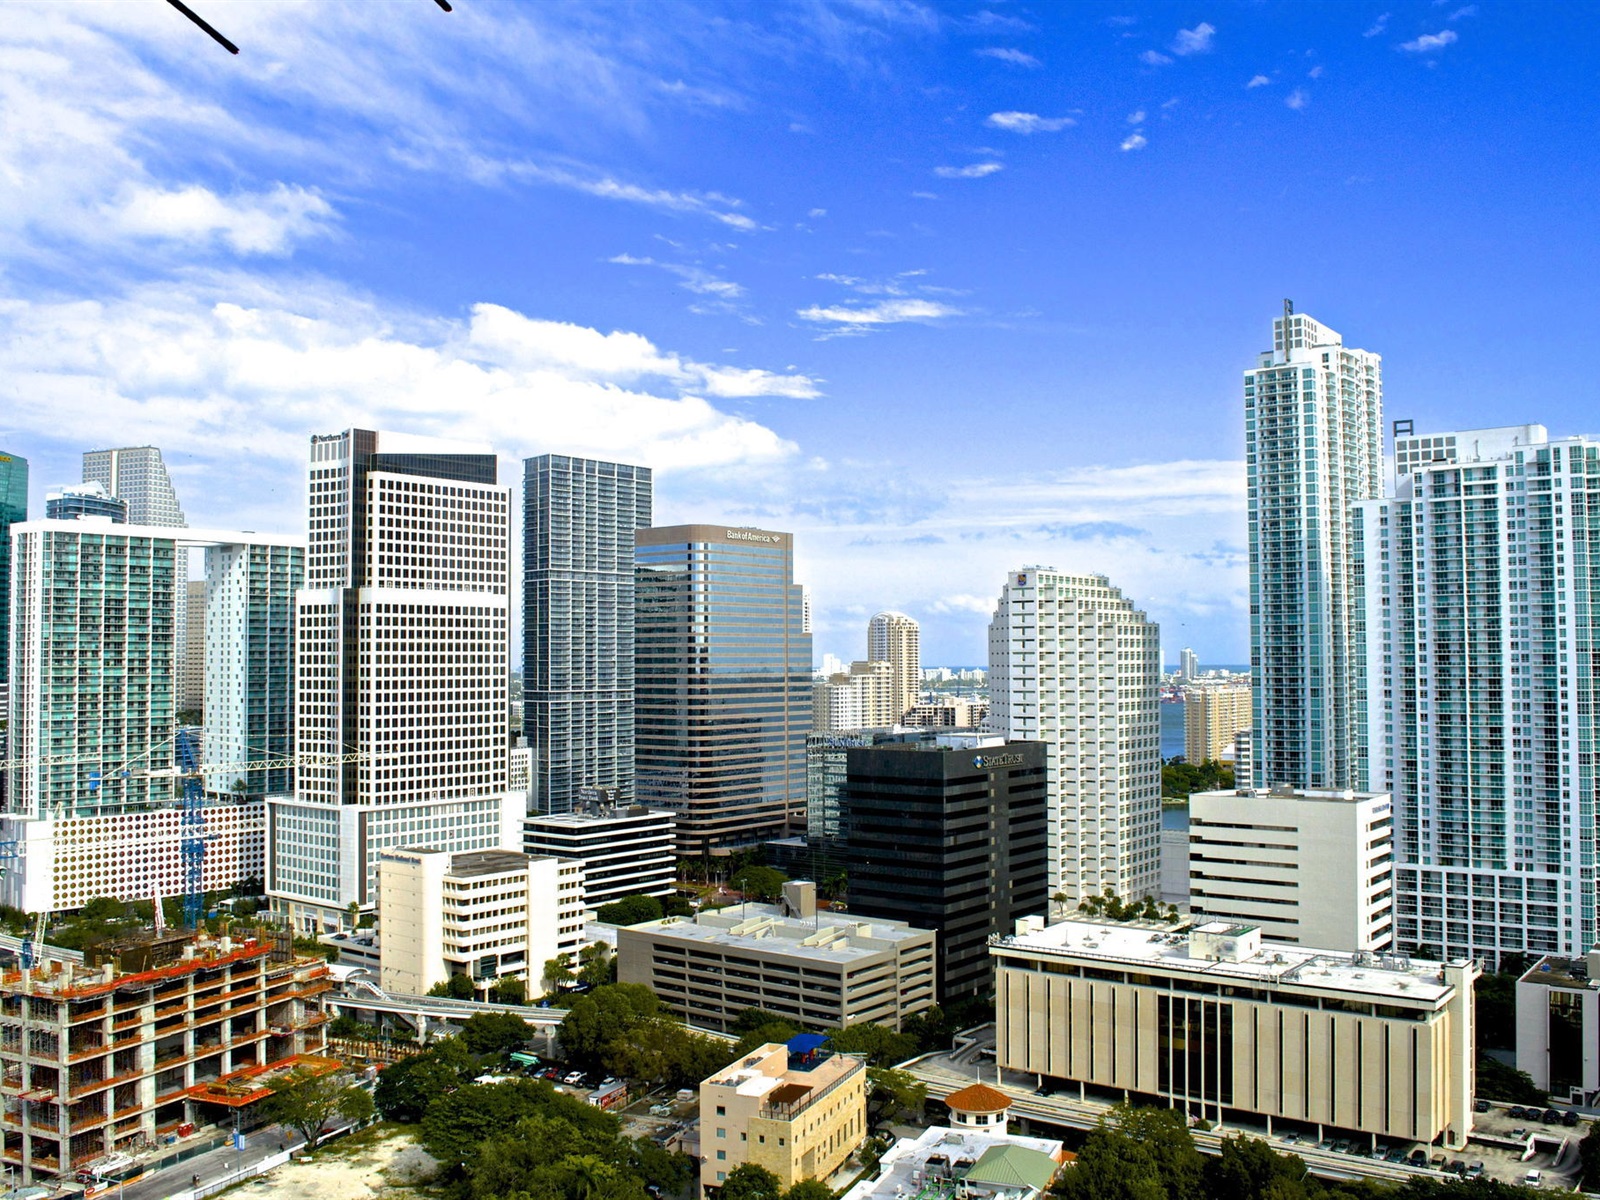 Wallpaper american city miami florida buildings houses x hd picture image